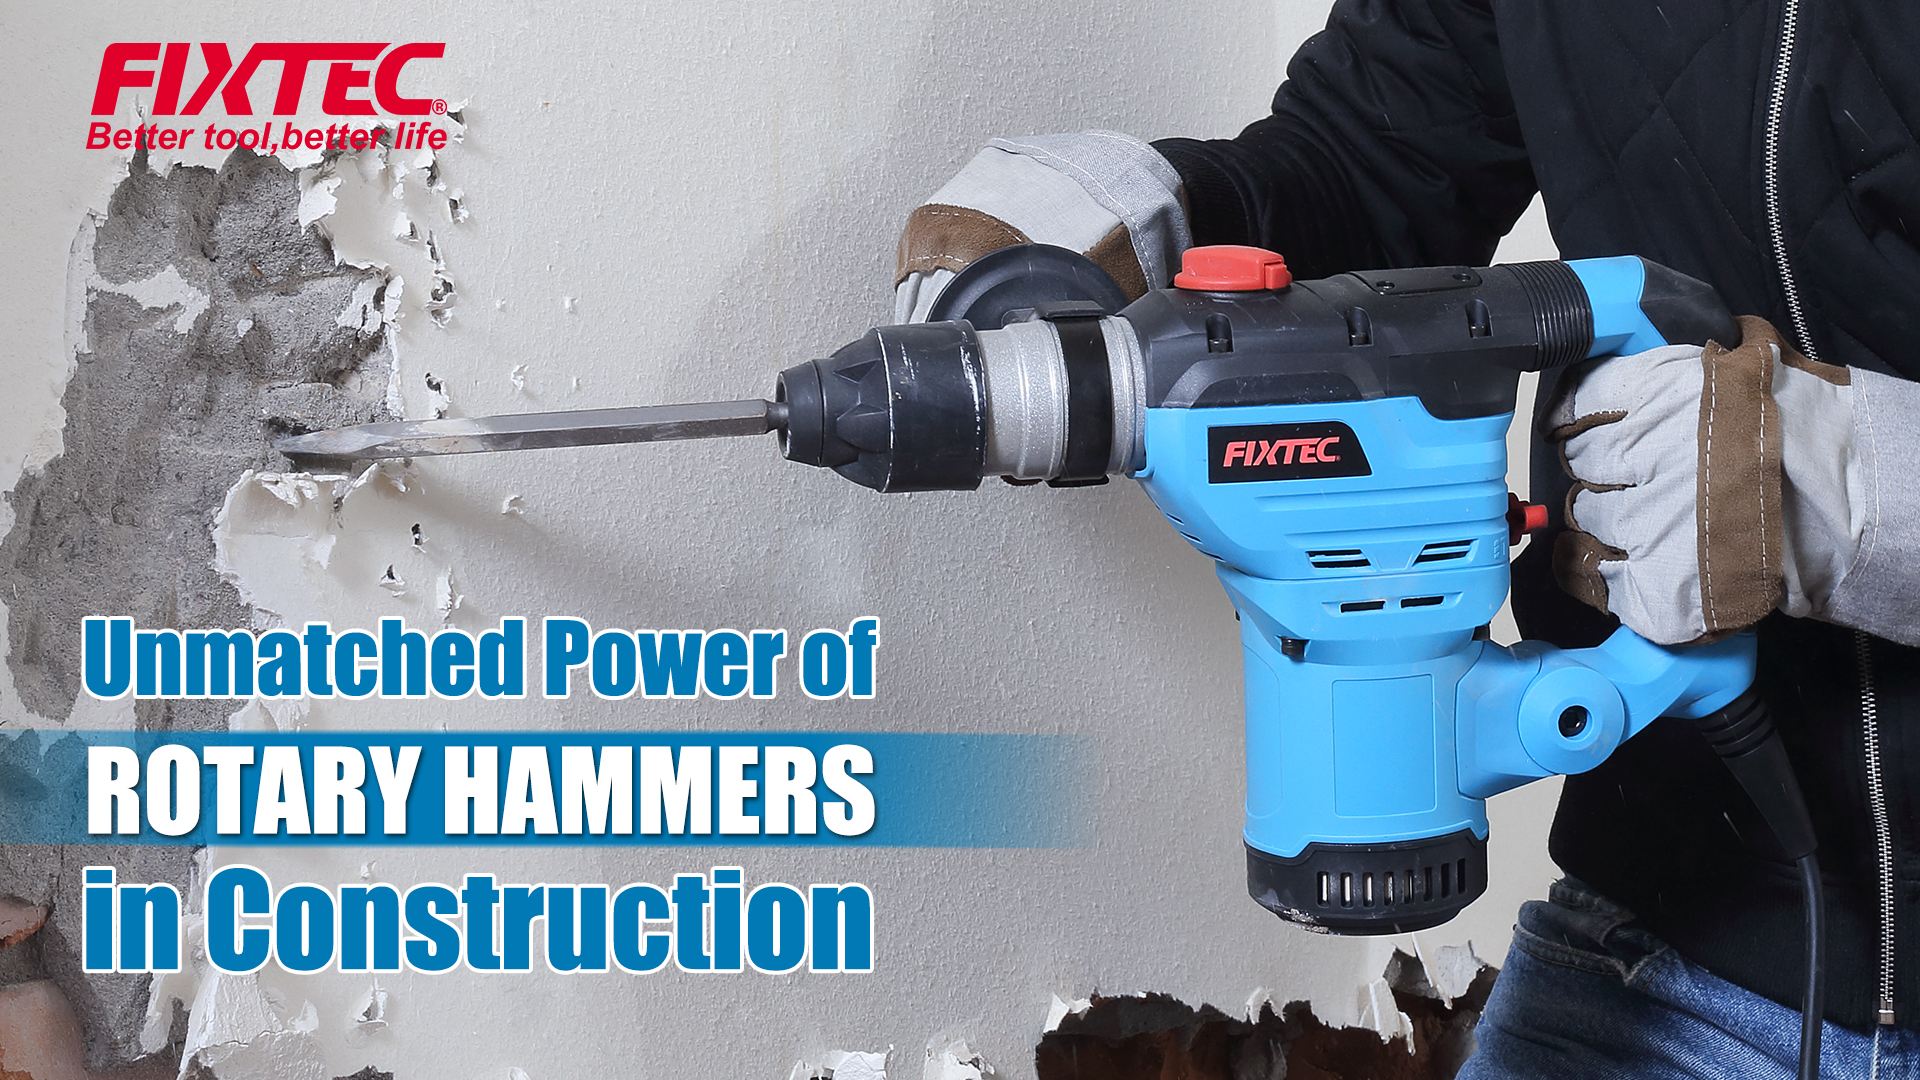 Revolutionizing Construction: Unveiling the Unmatched Power and Precision of Rotary Hammers